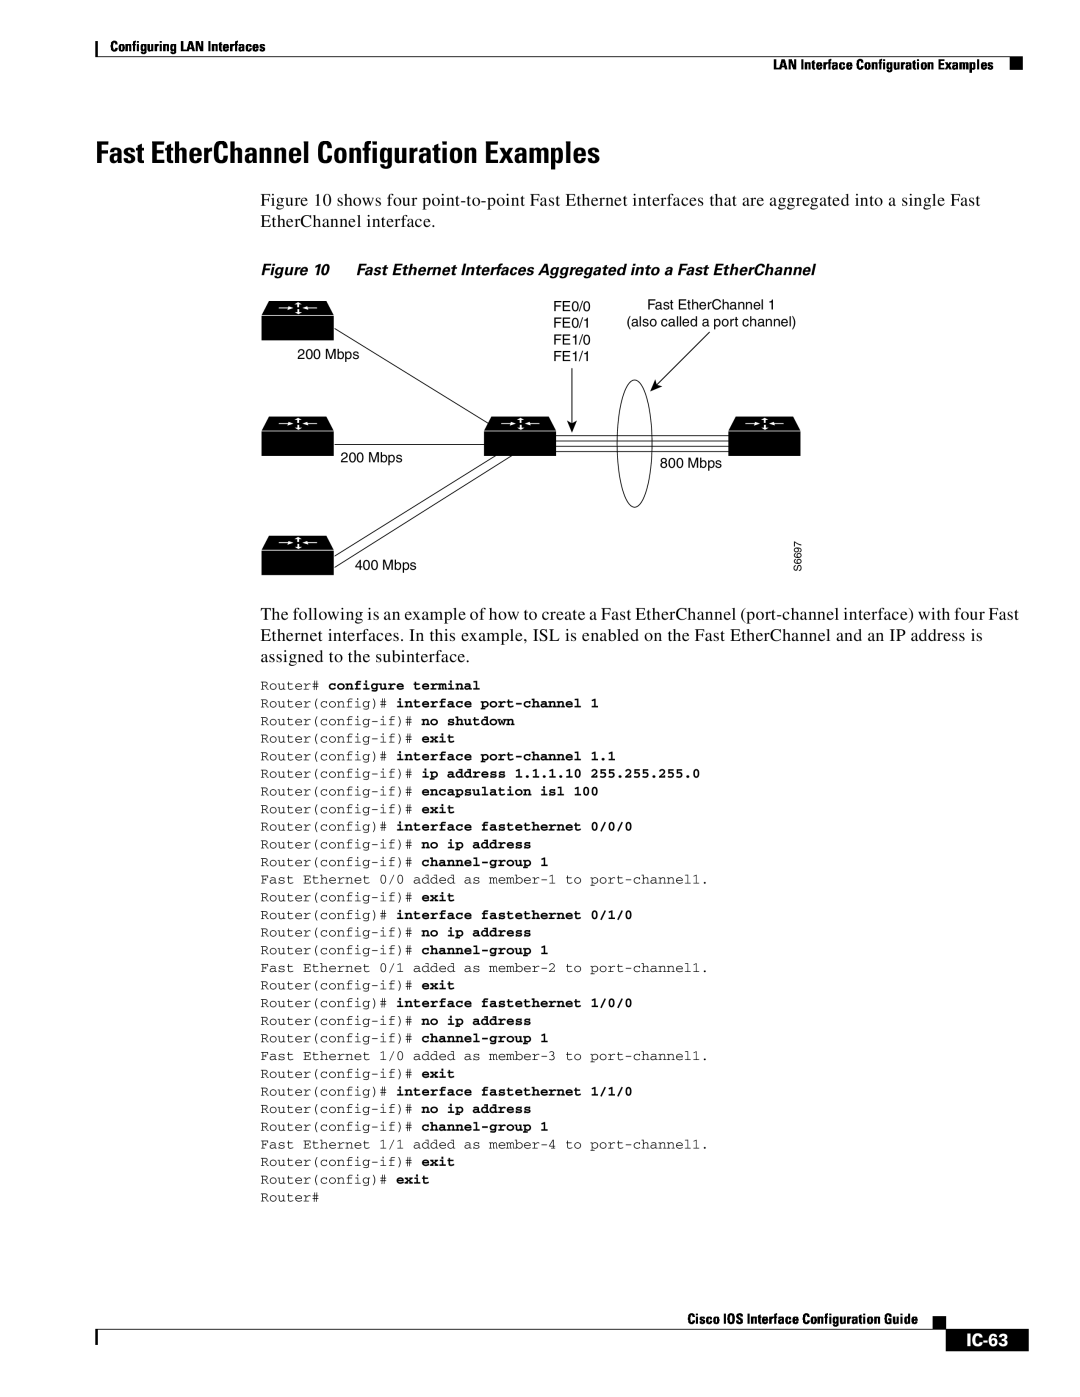 Cisco Systems IC-23 manual Fast EtherChannel Configuration Examples, IC-63 